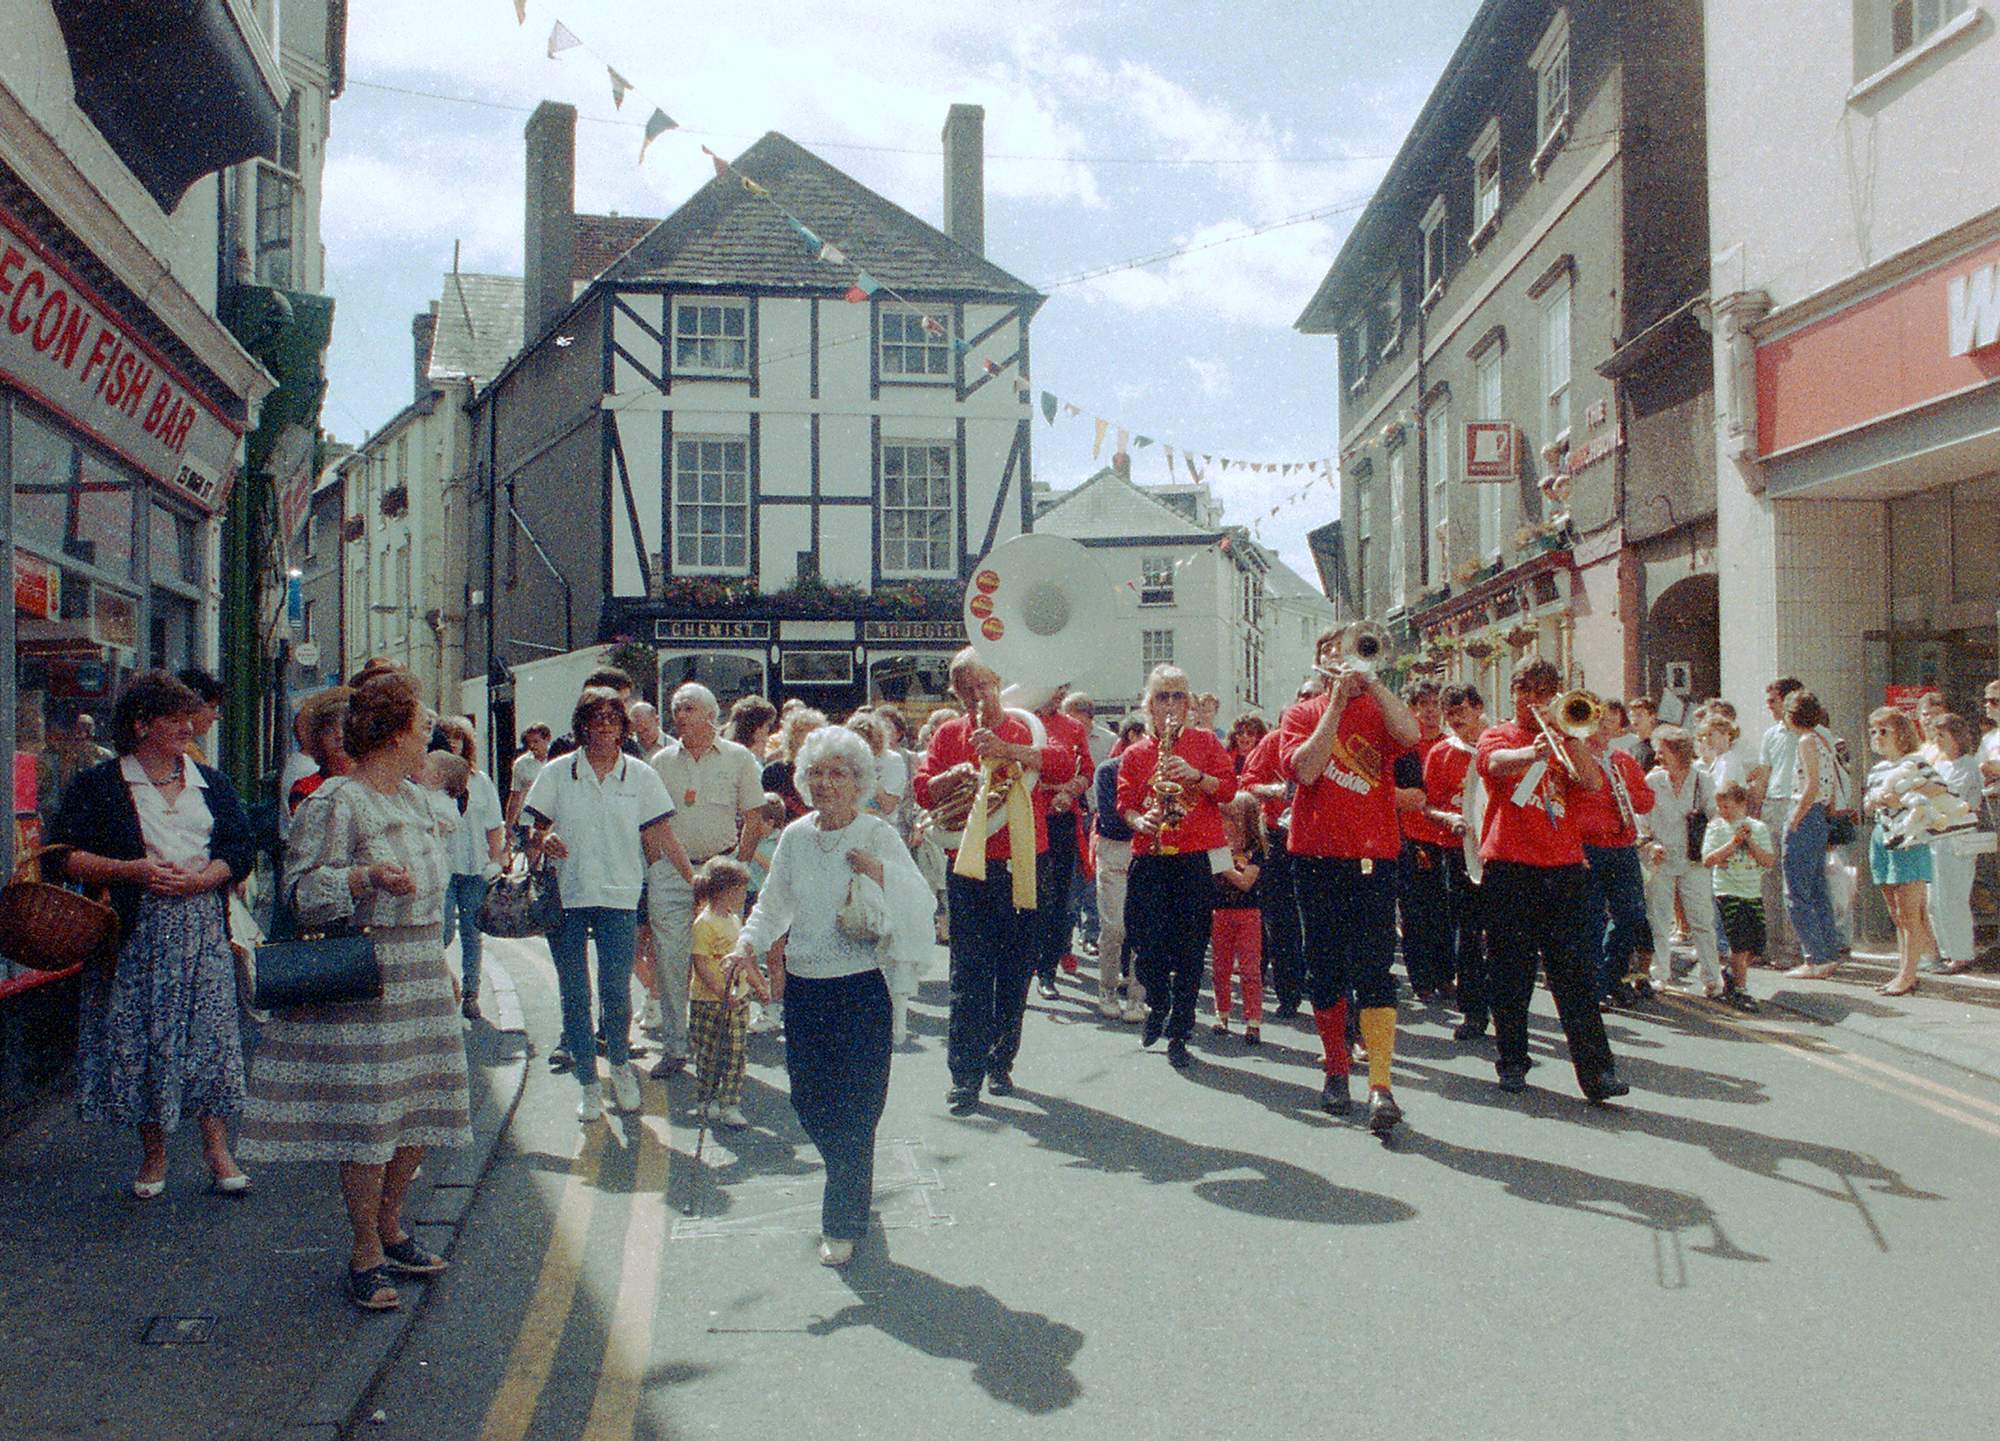 Image of Brass Band parading Brecon dressed in matching red t-shirts